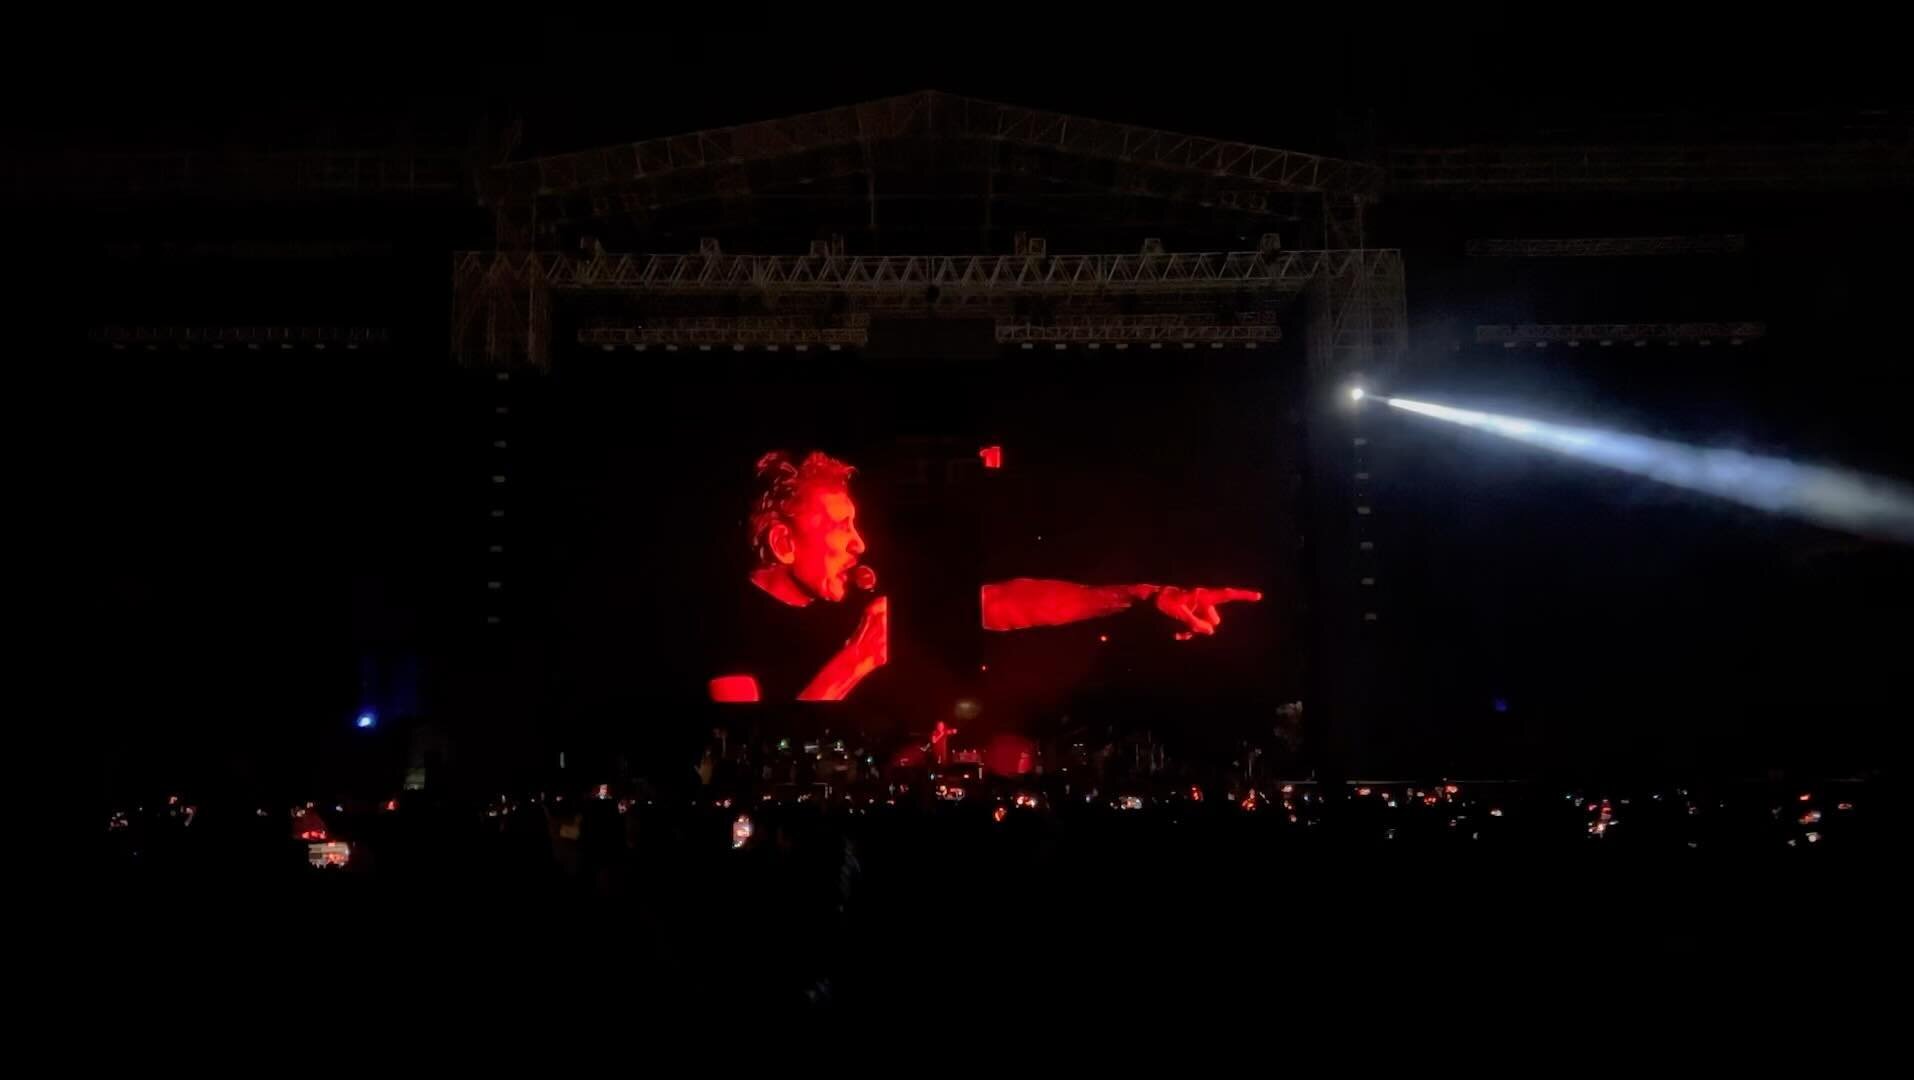 What an incredible night! Just experienced the musical genius of Roger Waters live on his &ldquo;This Is Not A Drill&rdquo; tour. From the electrifying performances to the mind-blowing visuals, it was an unforgettable journey through sound and emotio